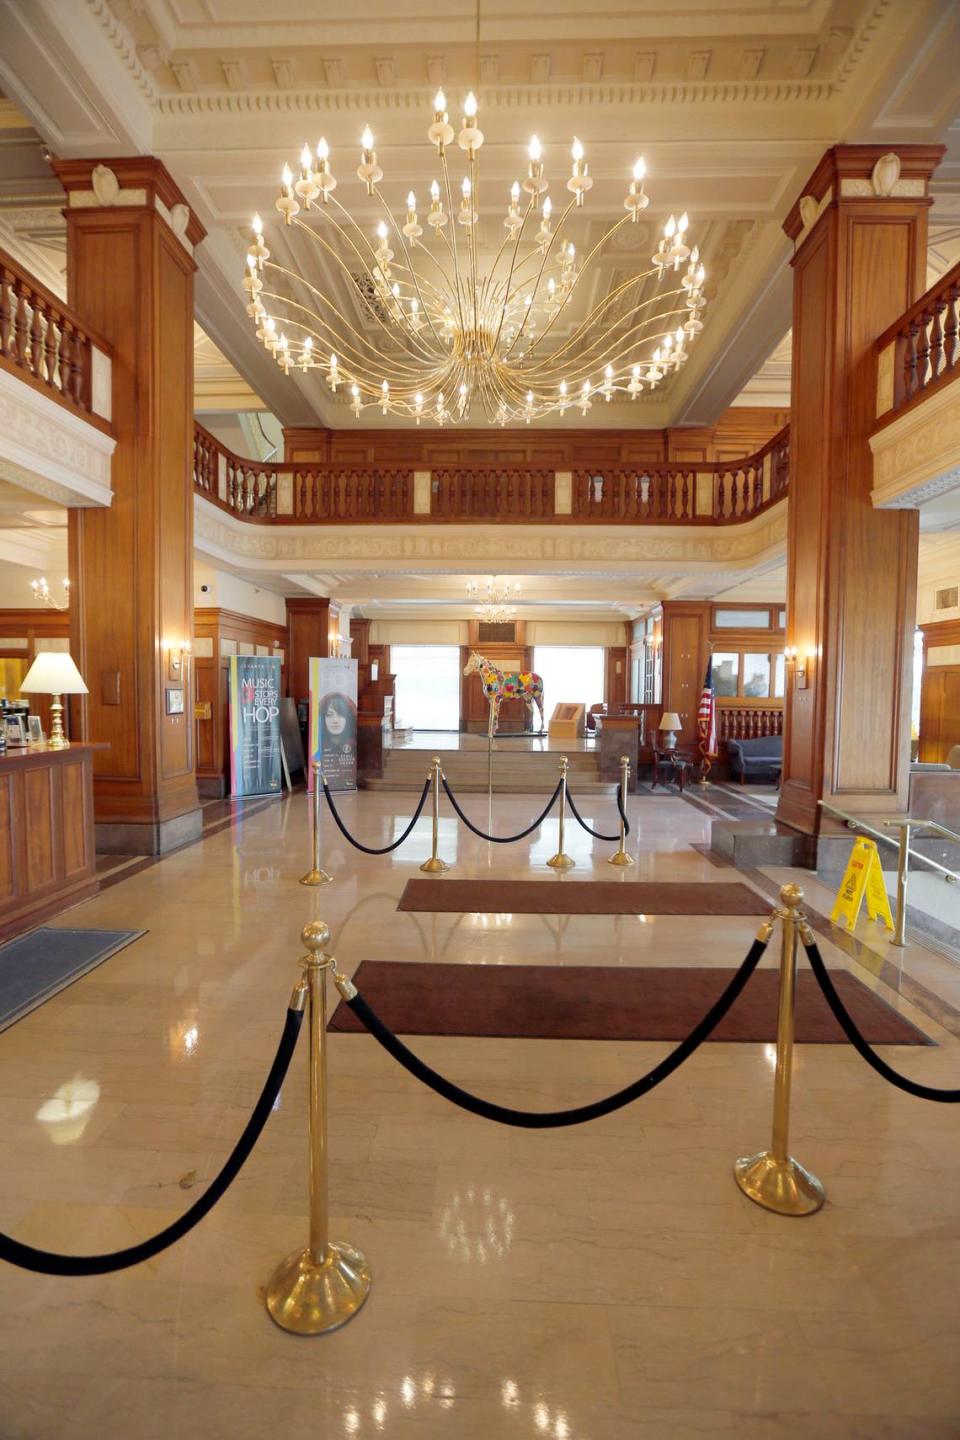 The lobby of the Lexington-Fayette Urban County Government Center includes a large chandelier, left over from its days as a hotel.